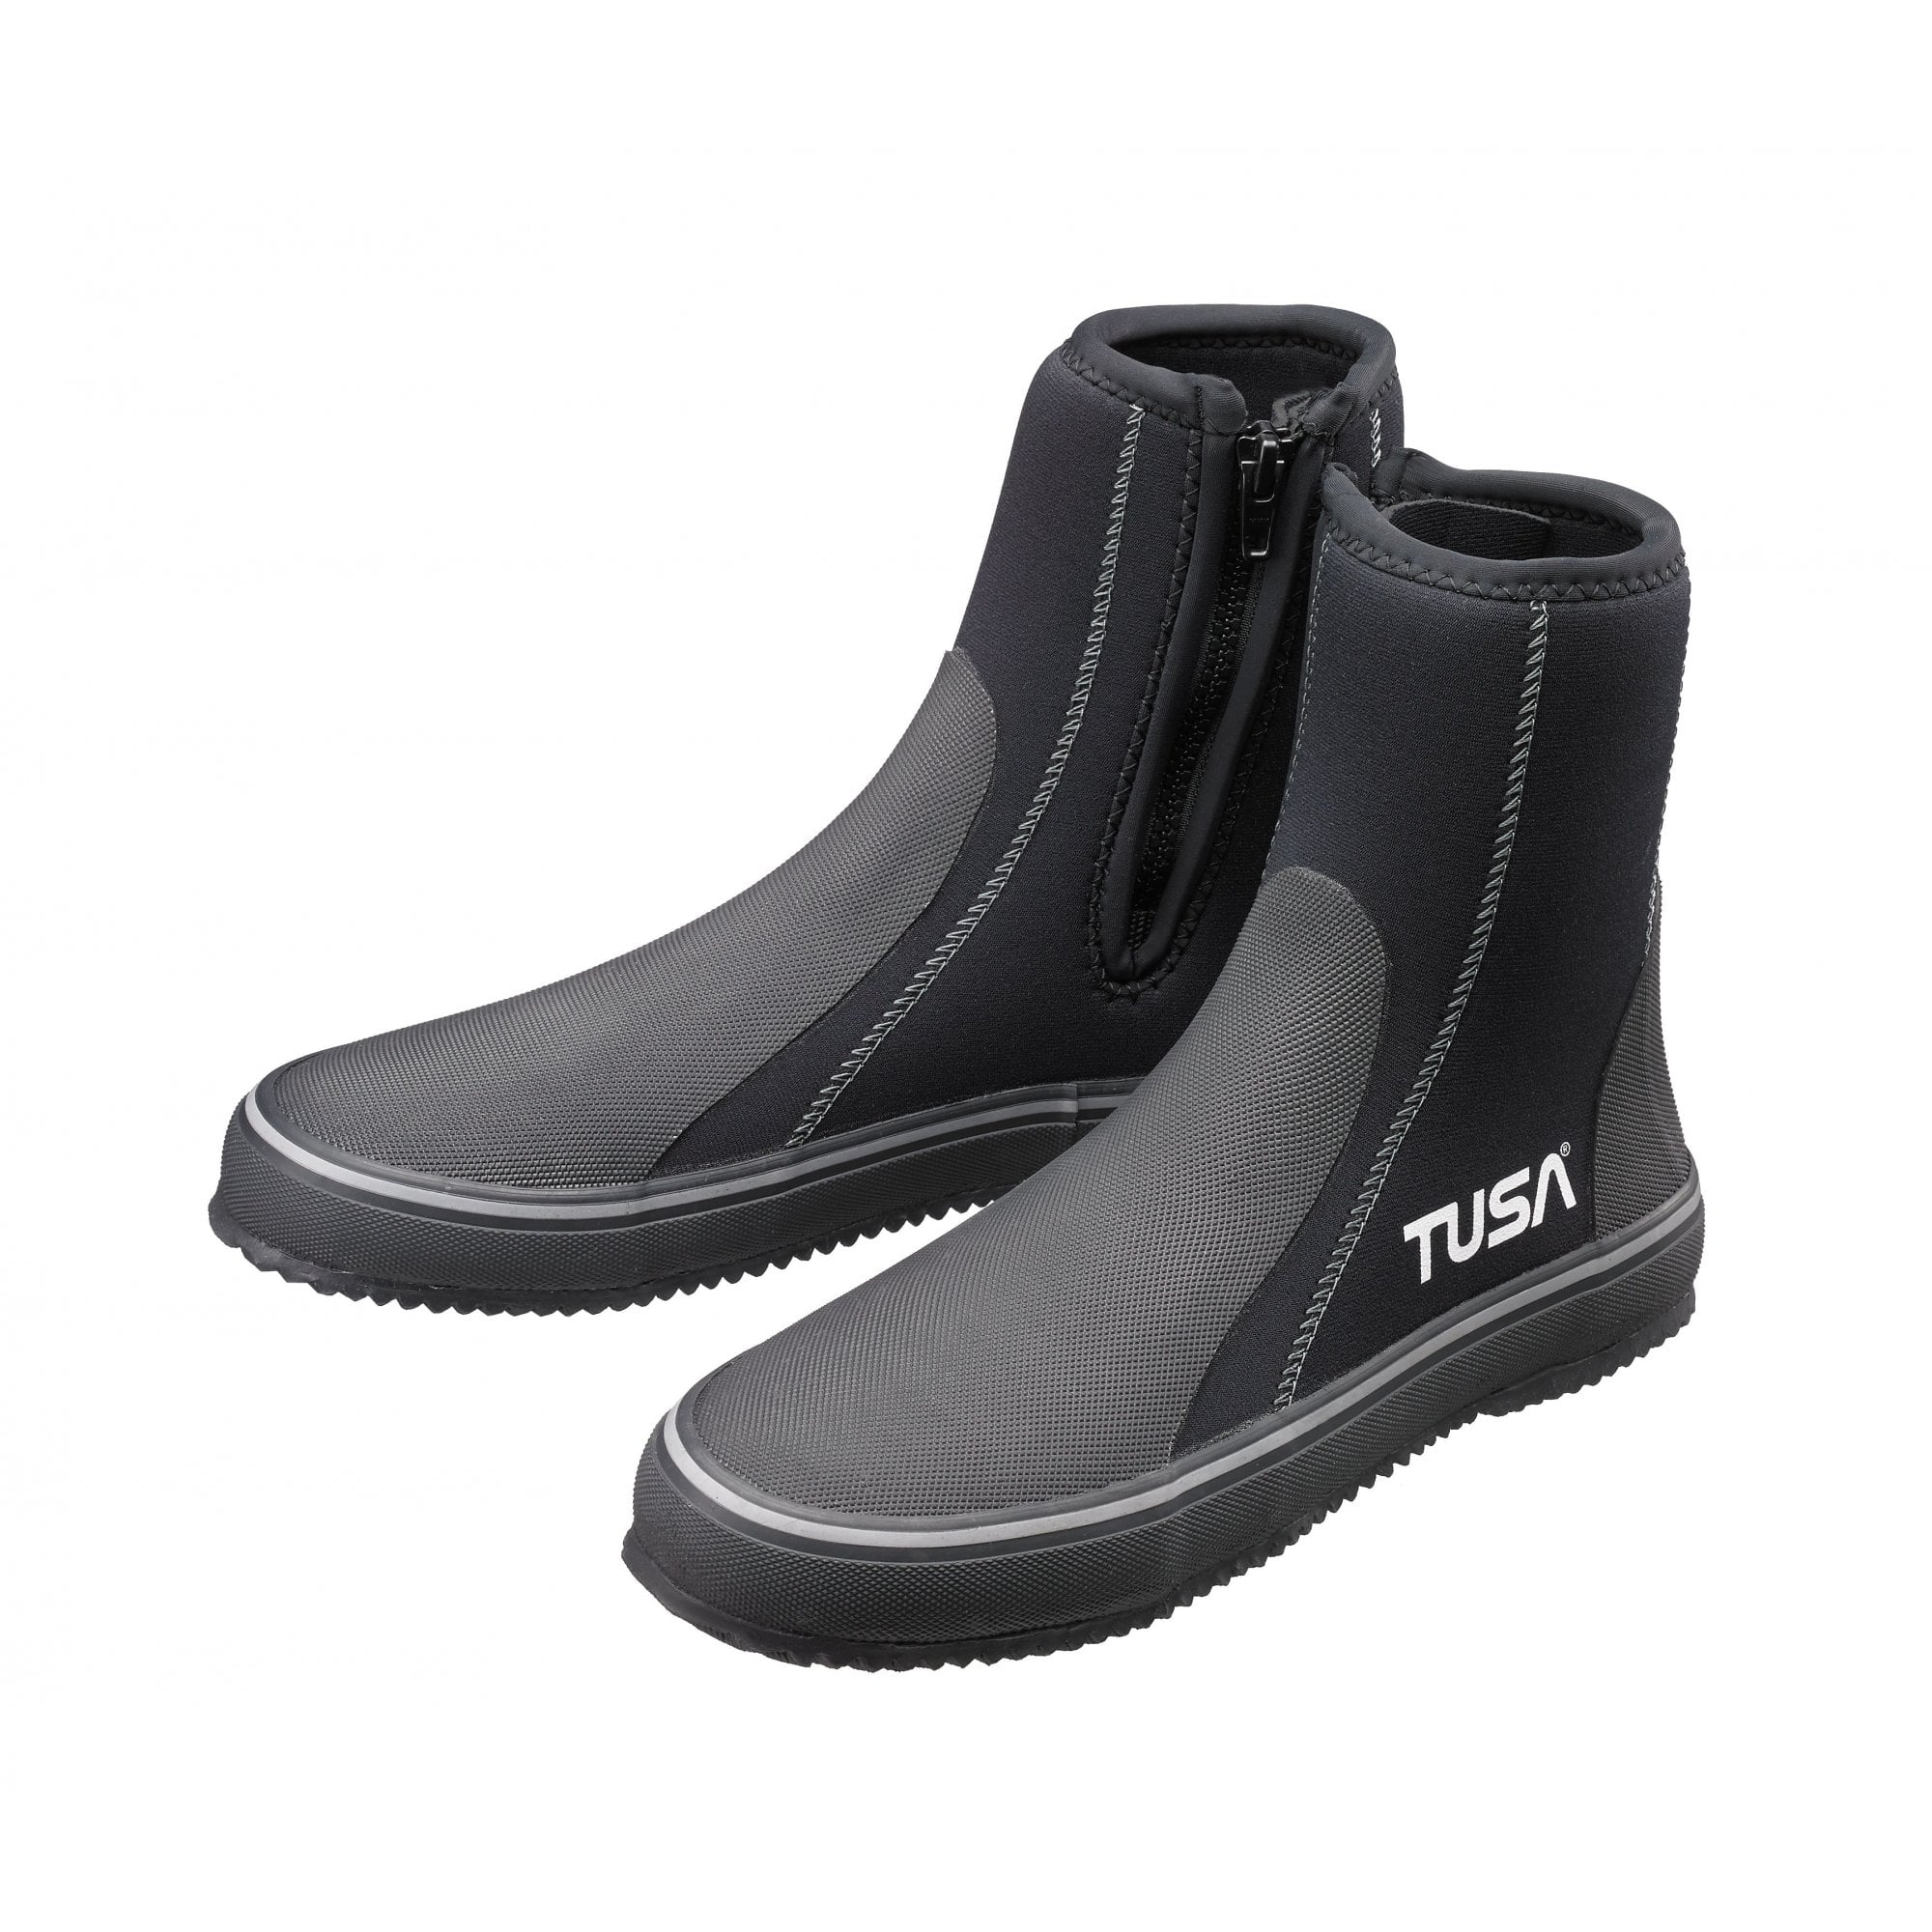 TUSA SS Dive Boots - 39